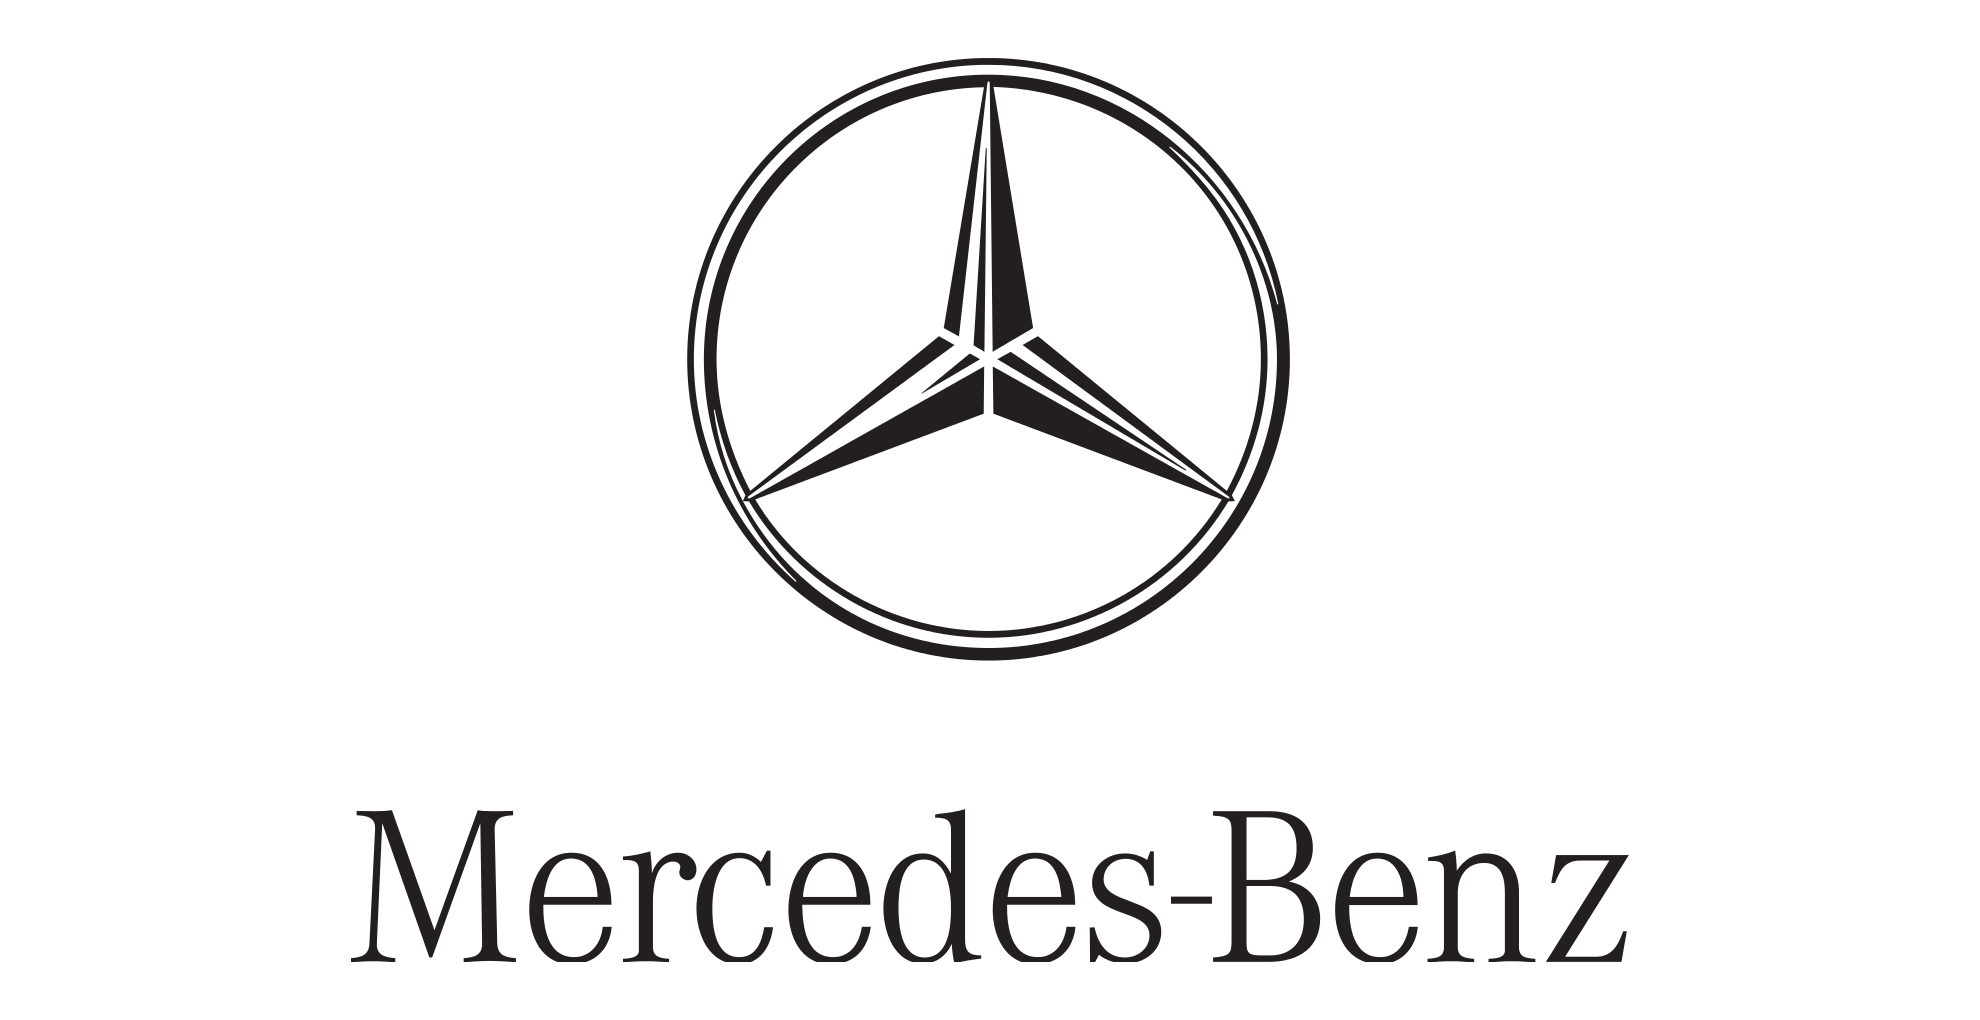 What is the Mercedes-Benz logo worth?